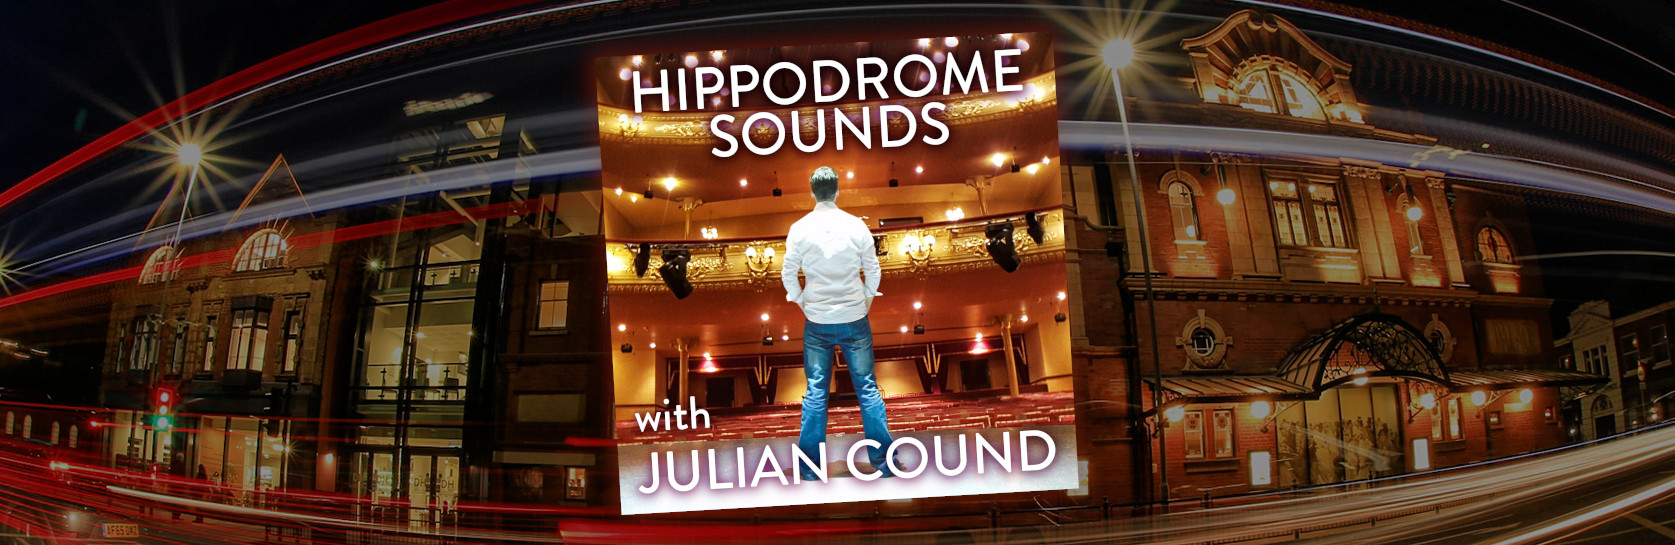 HIPPODROME SOUNDS WITH JULIAN COUND